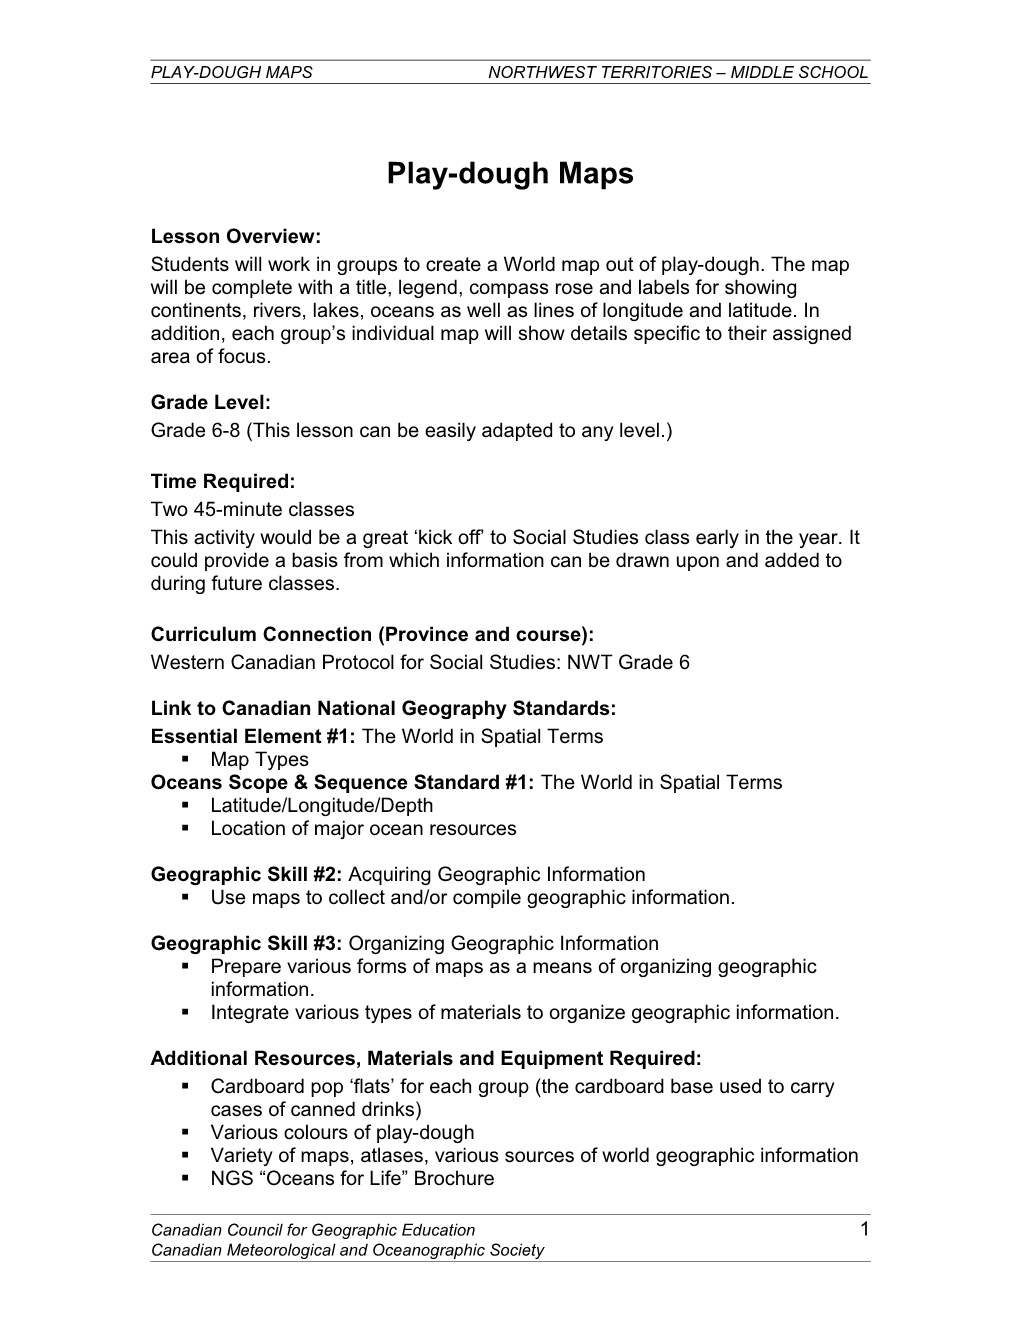 Play-Dough Maps Northwest Territories Middle School